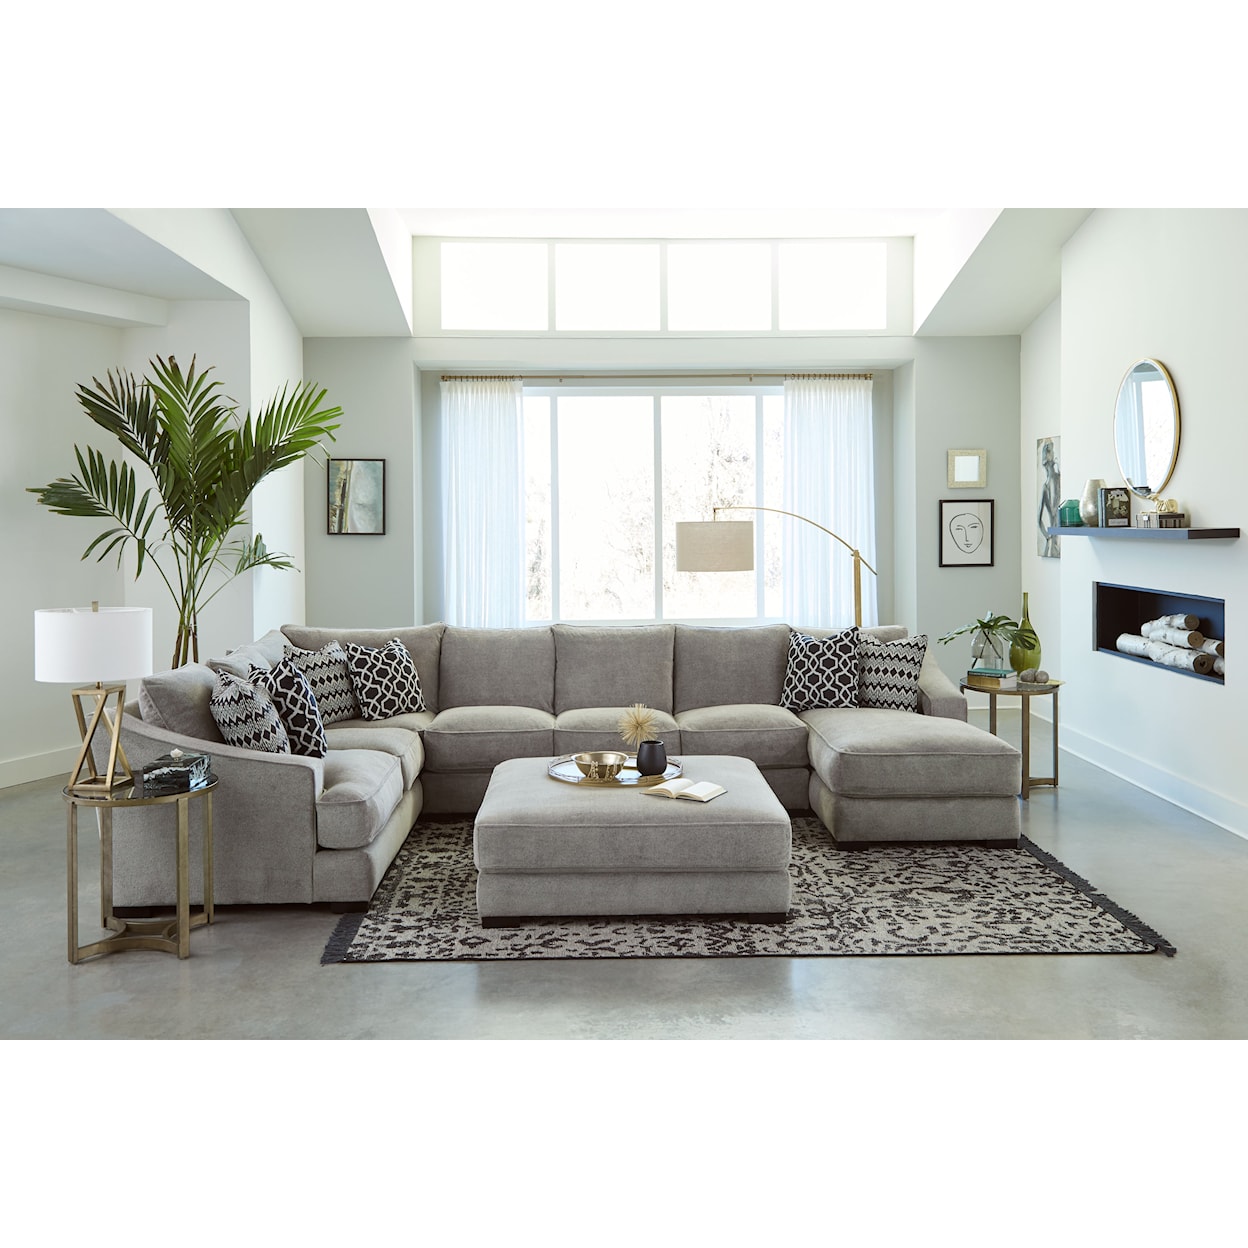 Sunset Home 338 3 Pc Sectional Sofa